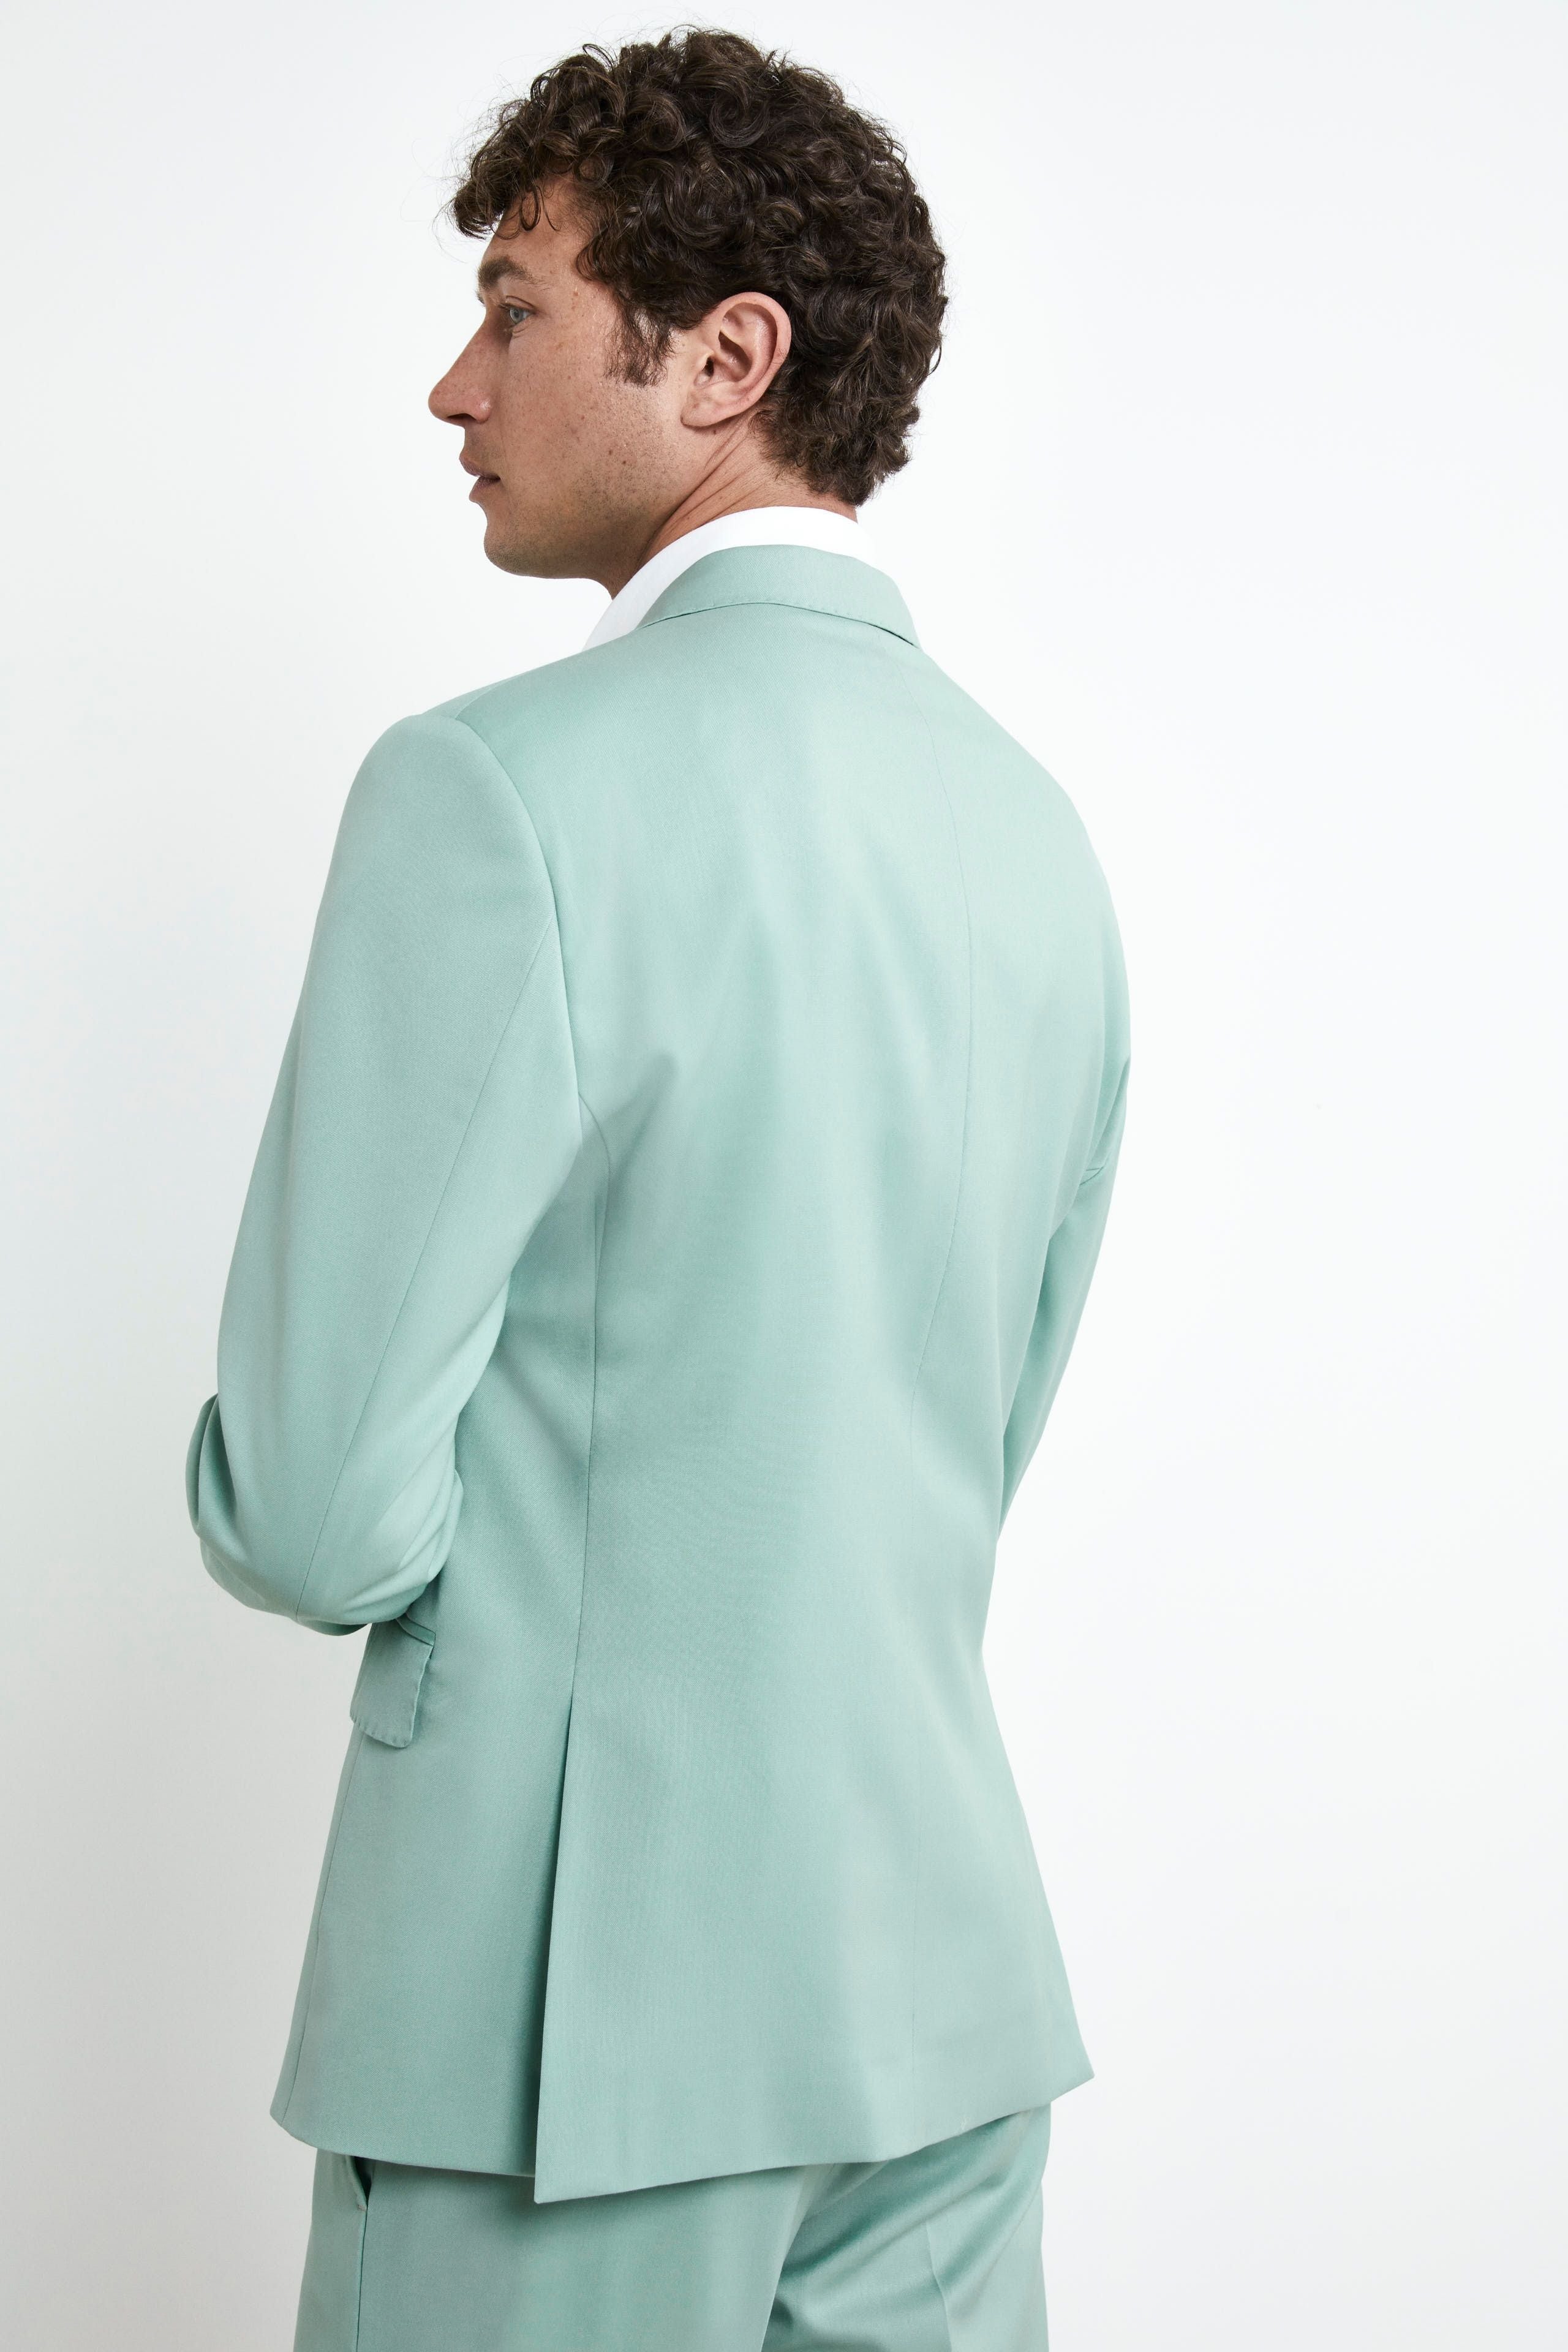 Structured Green Suit - Sage green